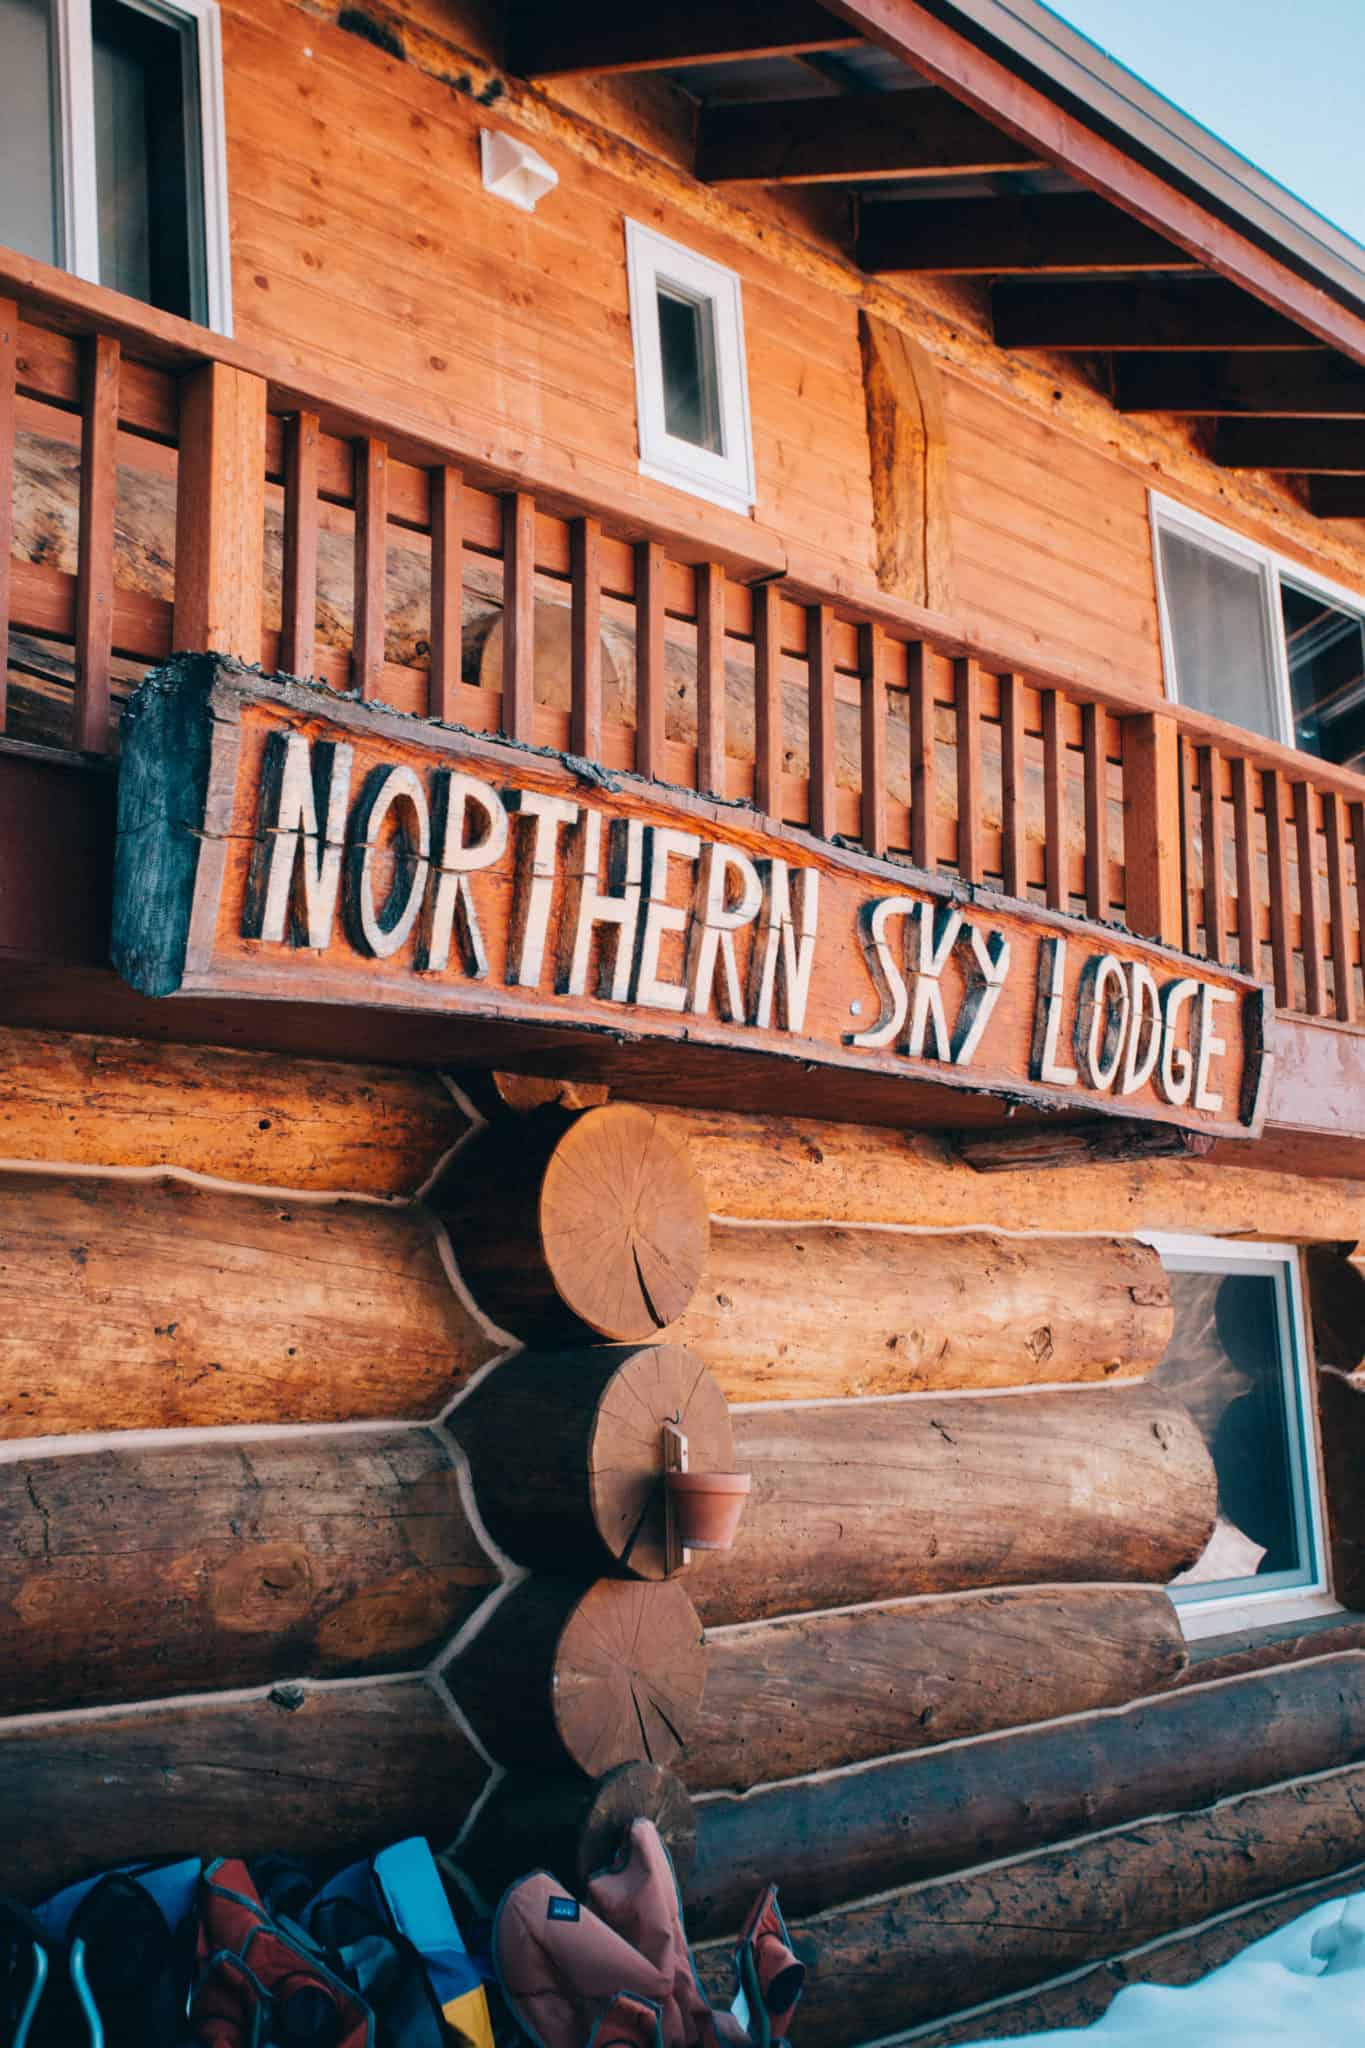 Things To Do In Fairbanks - Northern Sky Lodge